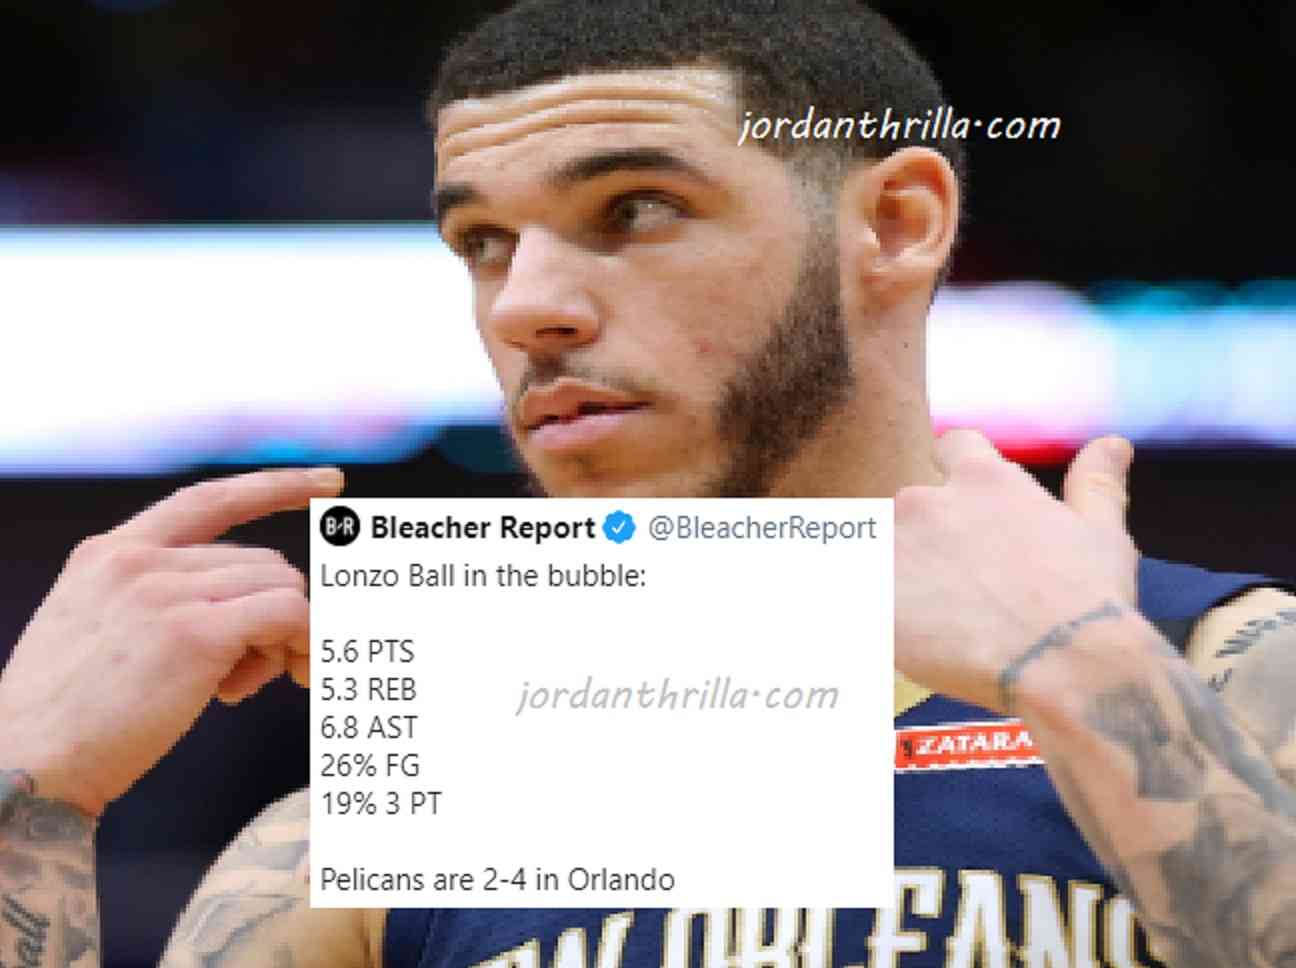 Lonzo Ball Responds To Bleacher Report Dissing Him By Posting his Orlando Bubble Stats